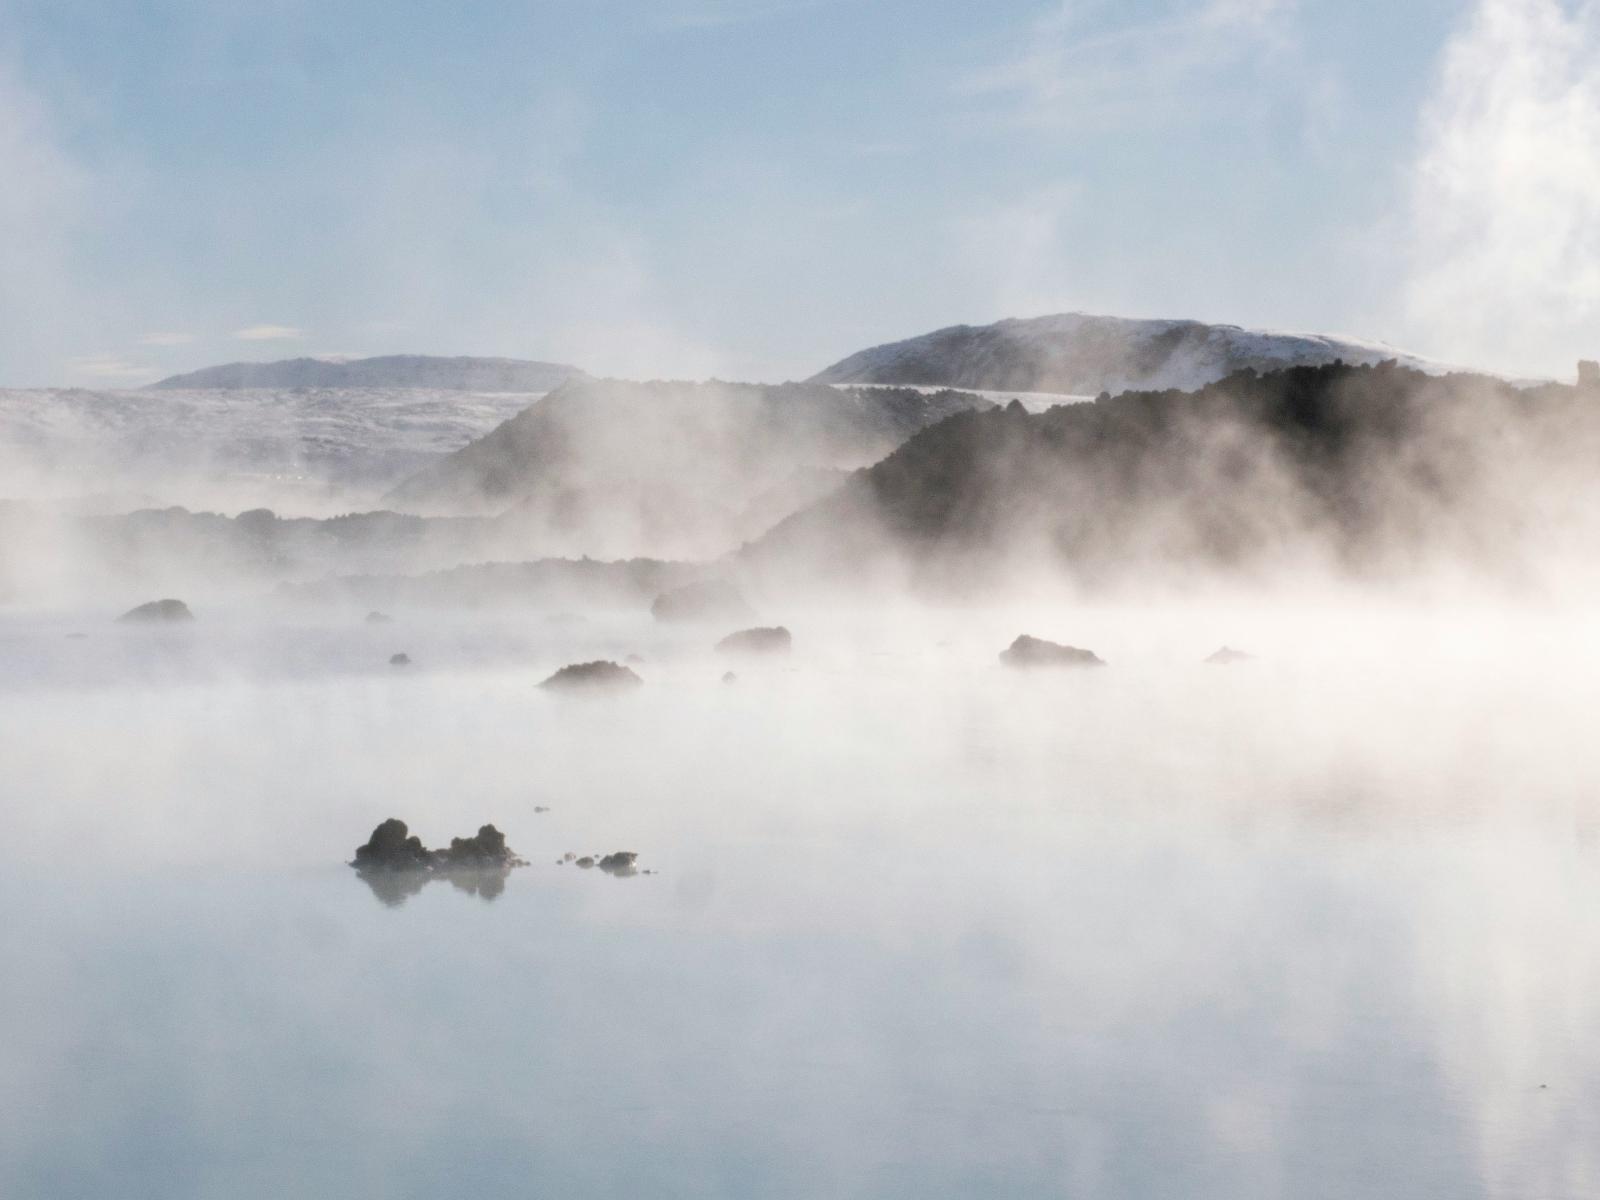 Steam rising off a lake, mountains in backdrop.